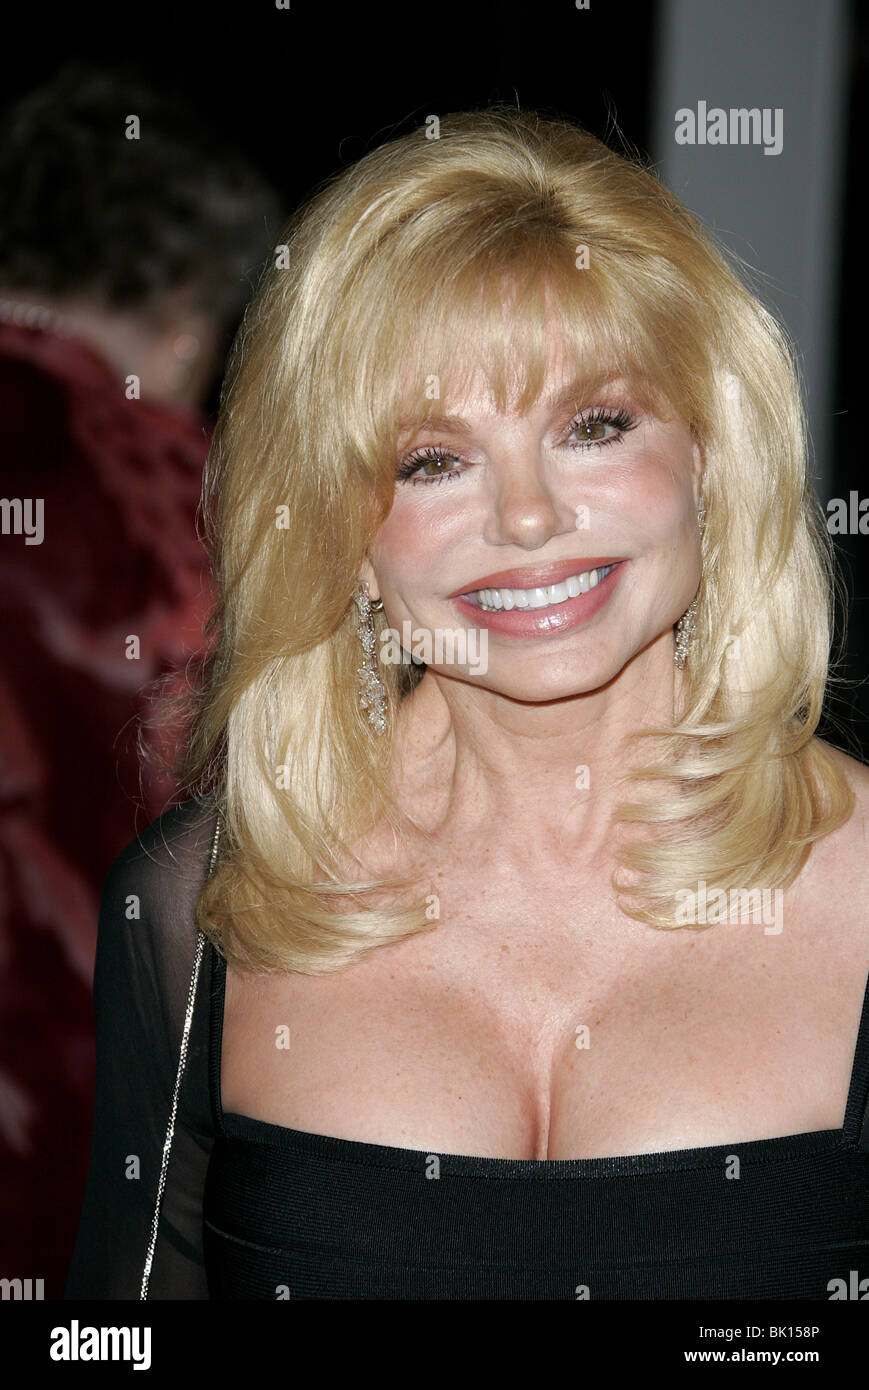 LONI ANDERSON 8TH COSTUMWE DESIGNERS GUILD AWARDS BEVERLY HILLS CALIFORNIA USA 25 February 2006 Stock Photo